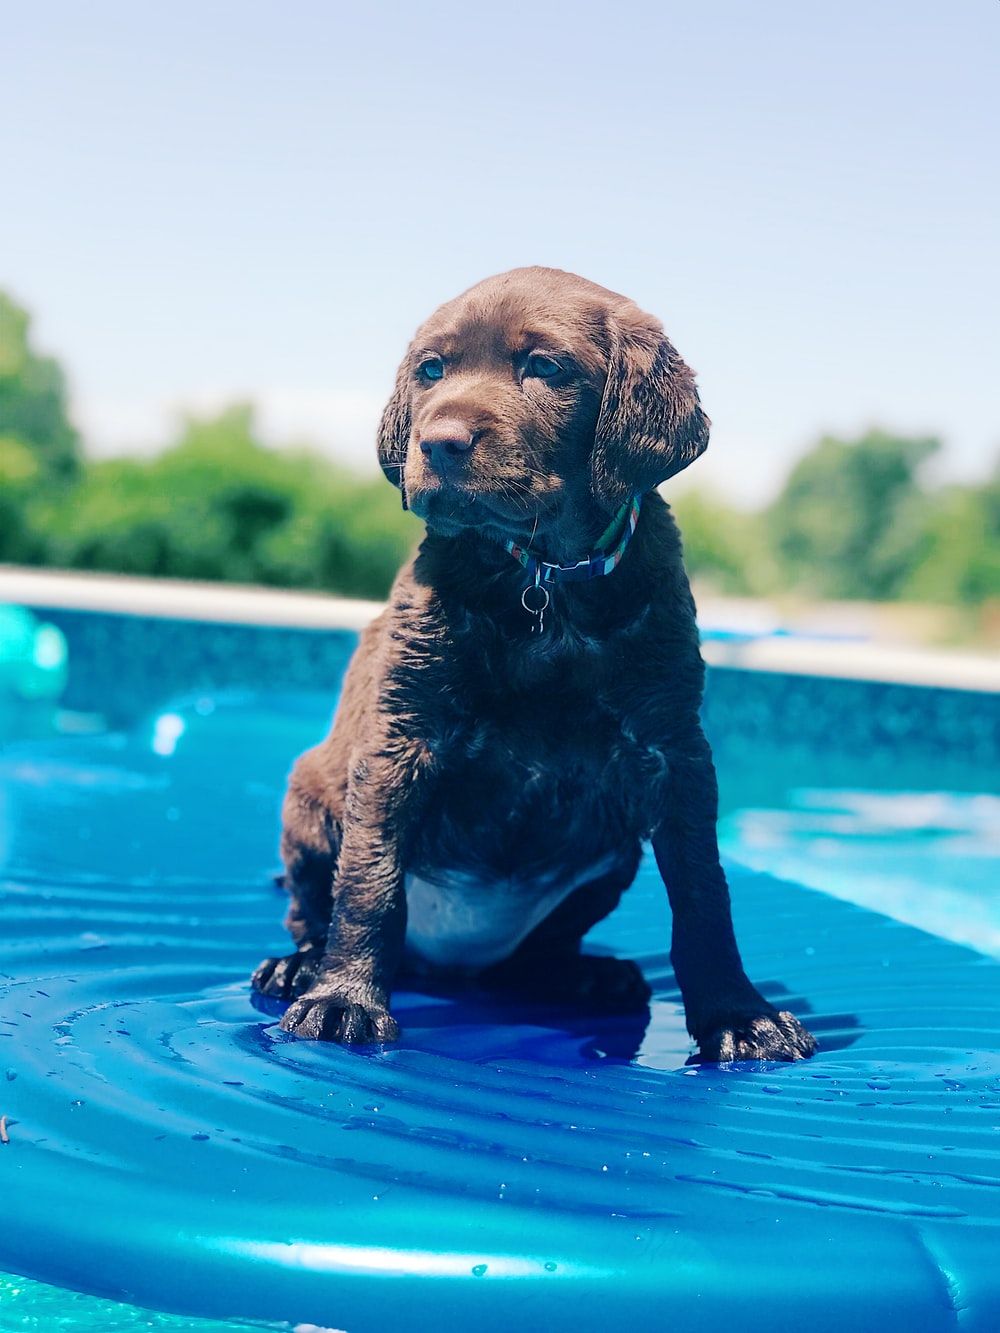 Dog In Pool Picture. Download Free Image